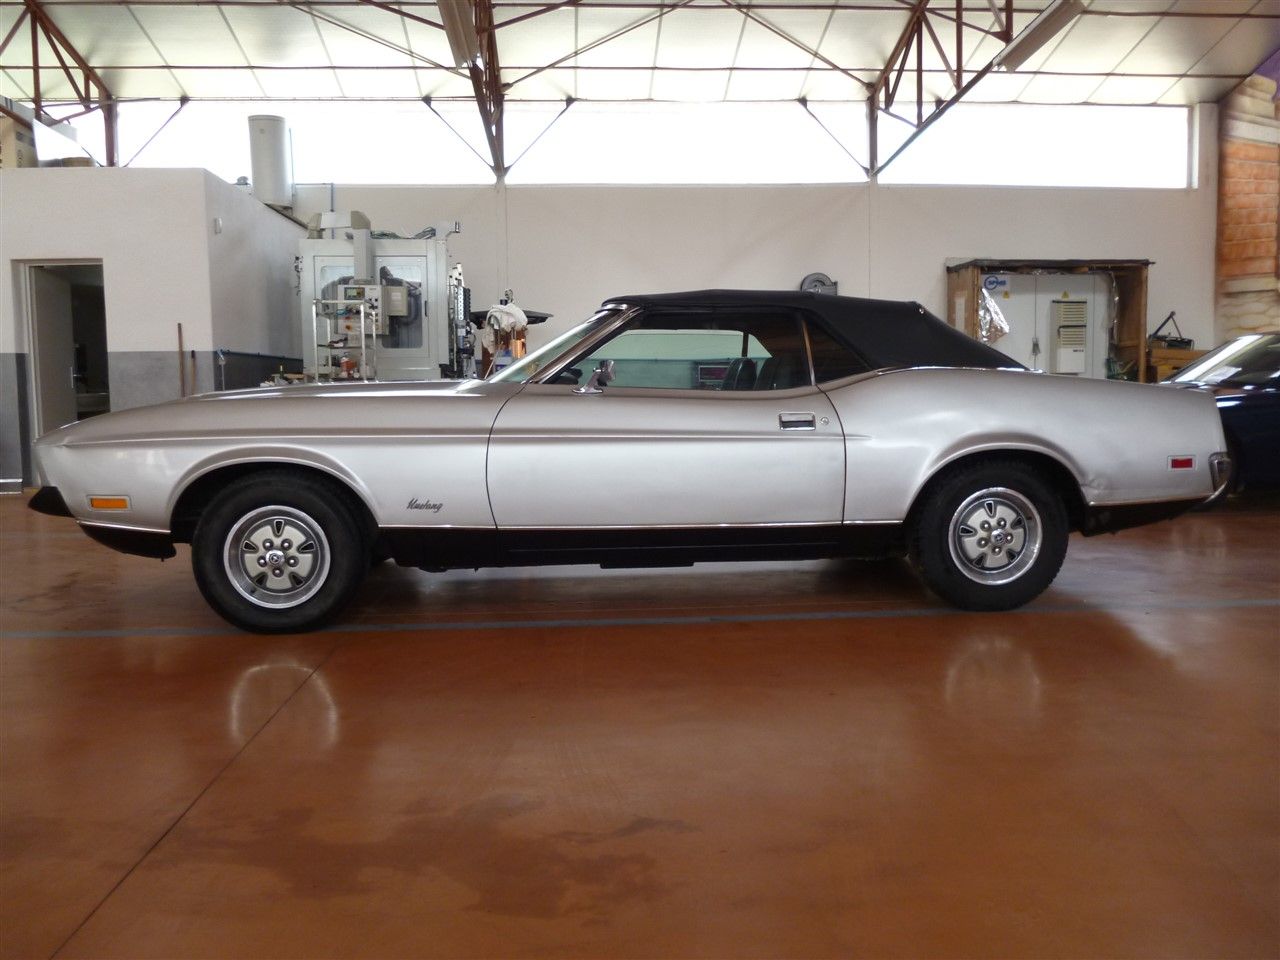 FORD MUSTANG CABRIOLET - 1972 N° Série : 2F03Q166142 

Il y a 57 ans Ford présen&hellip;